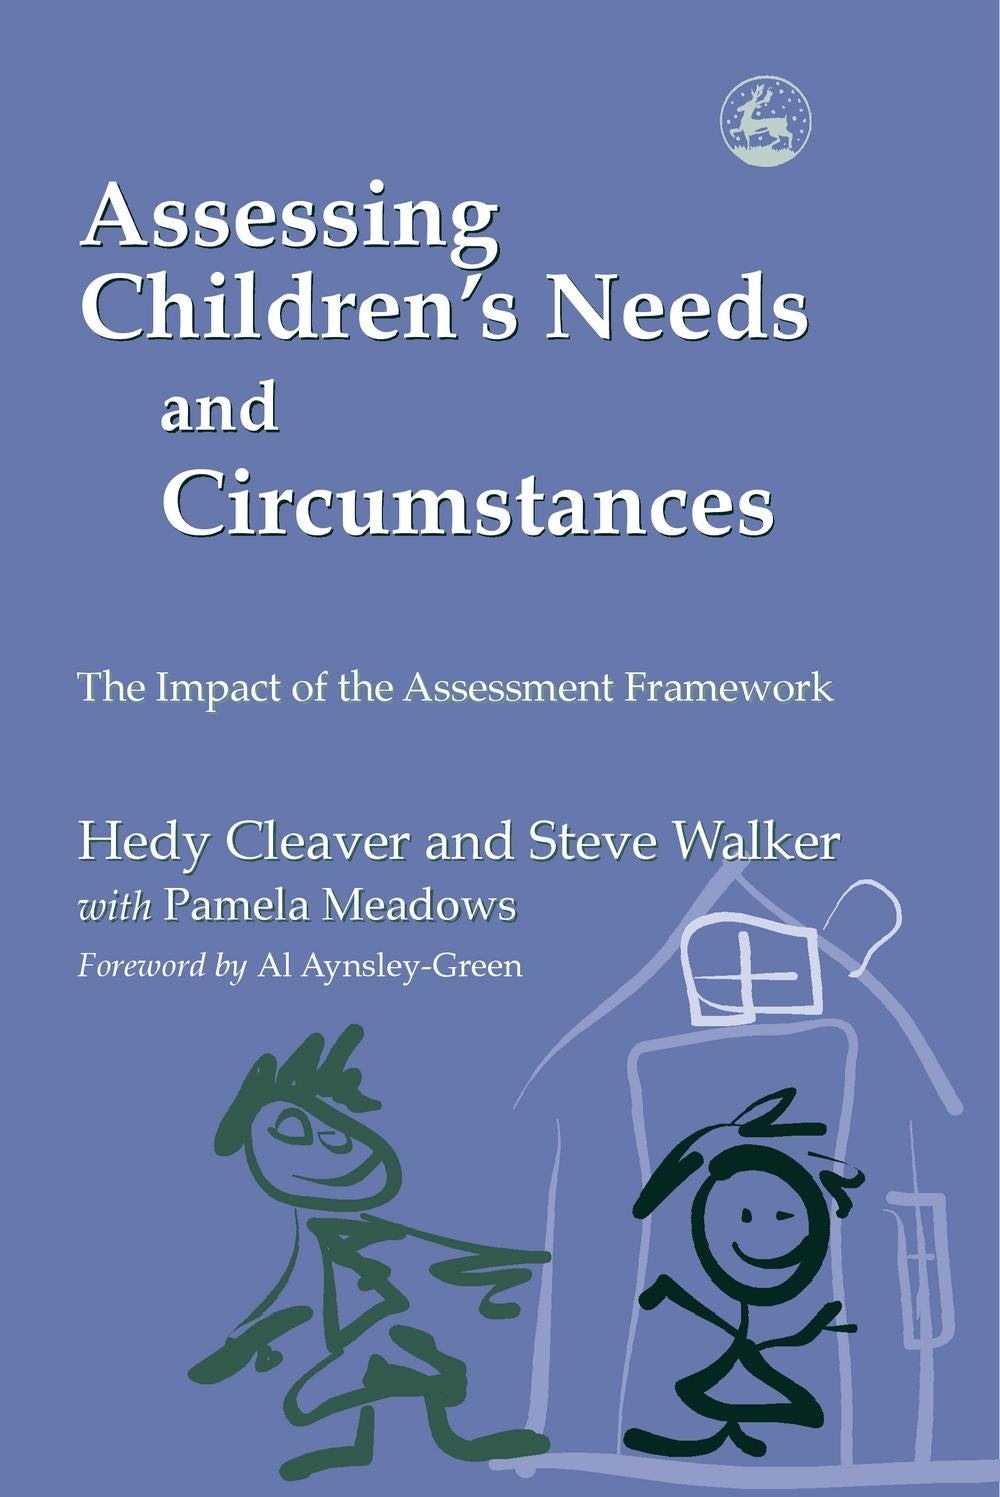 Assessing Children's Needs and Circumstances by Al Aynsley-Green, Hedy Cleaver, Steve Walker